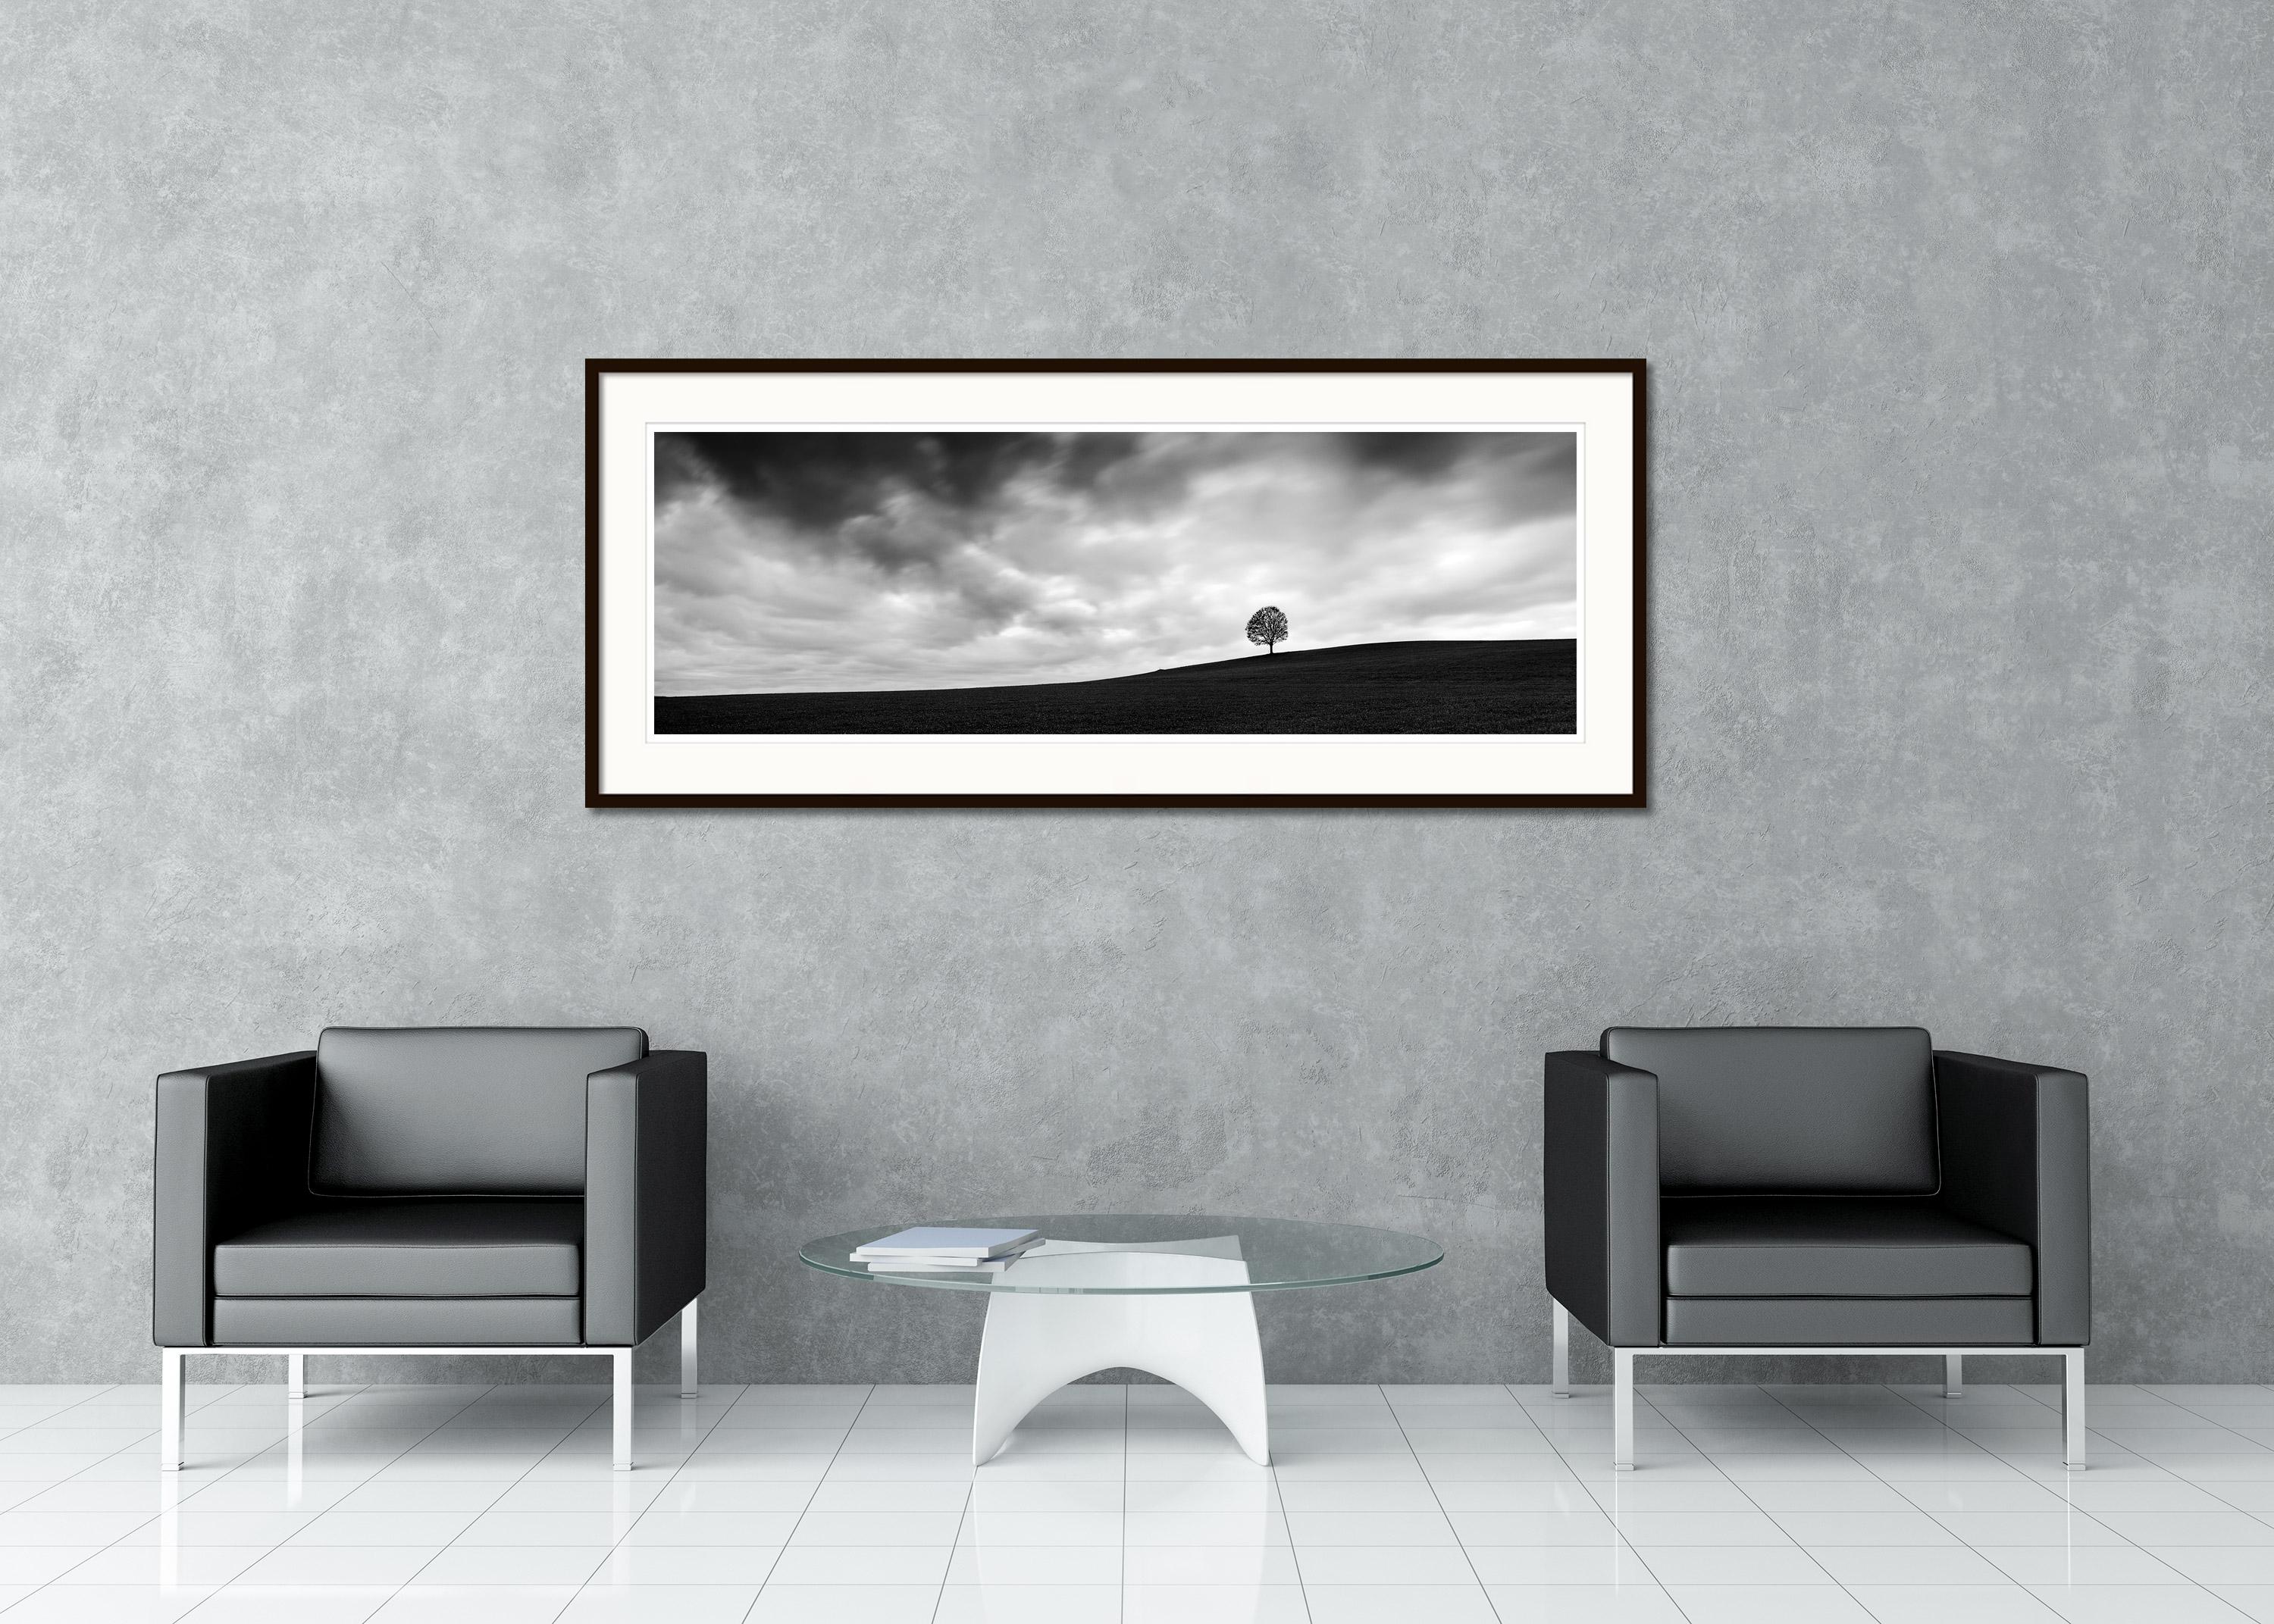 Black and White Fine Art panorama photography - Single tree on field with impressive clouds, Austria. Archival pigment ink print, edition of 9. Signed, titled, dated and numbered by artist. Certificate of authenticity included. Printed with 4cm